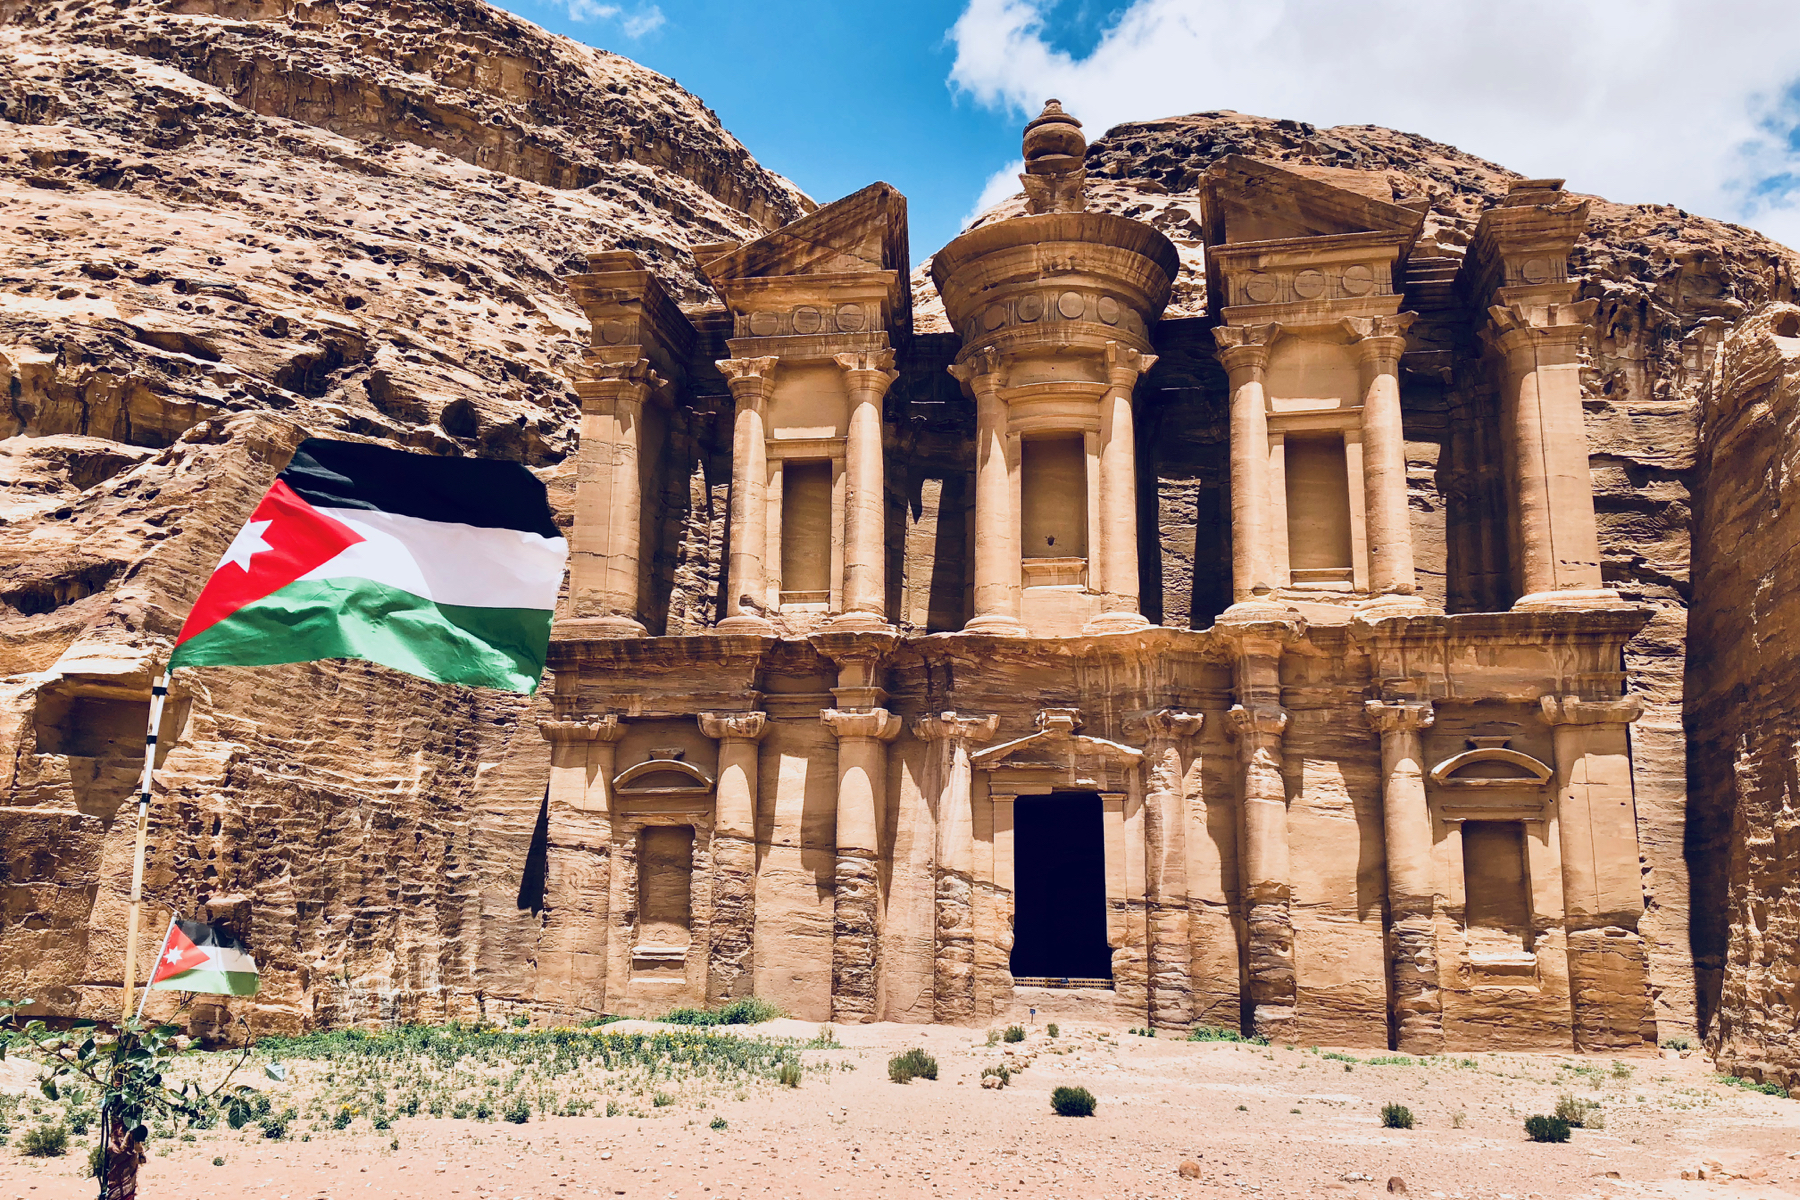 The Monastery at Petra with a Jordanian flag